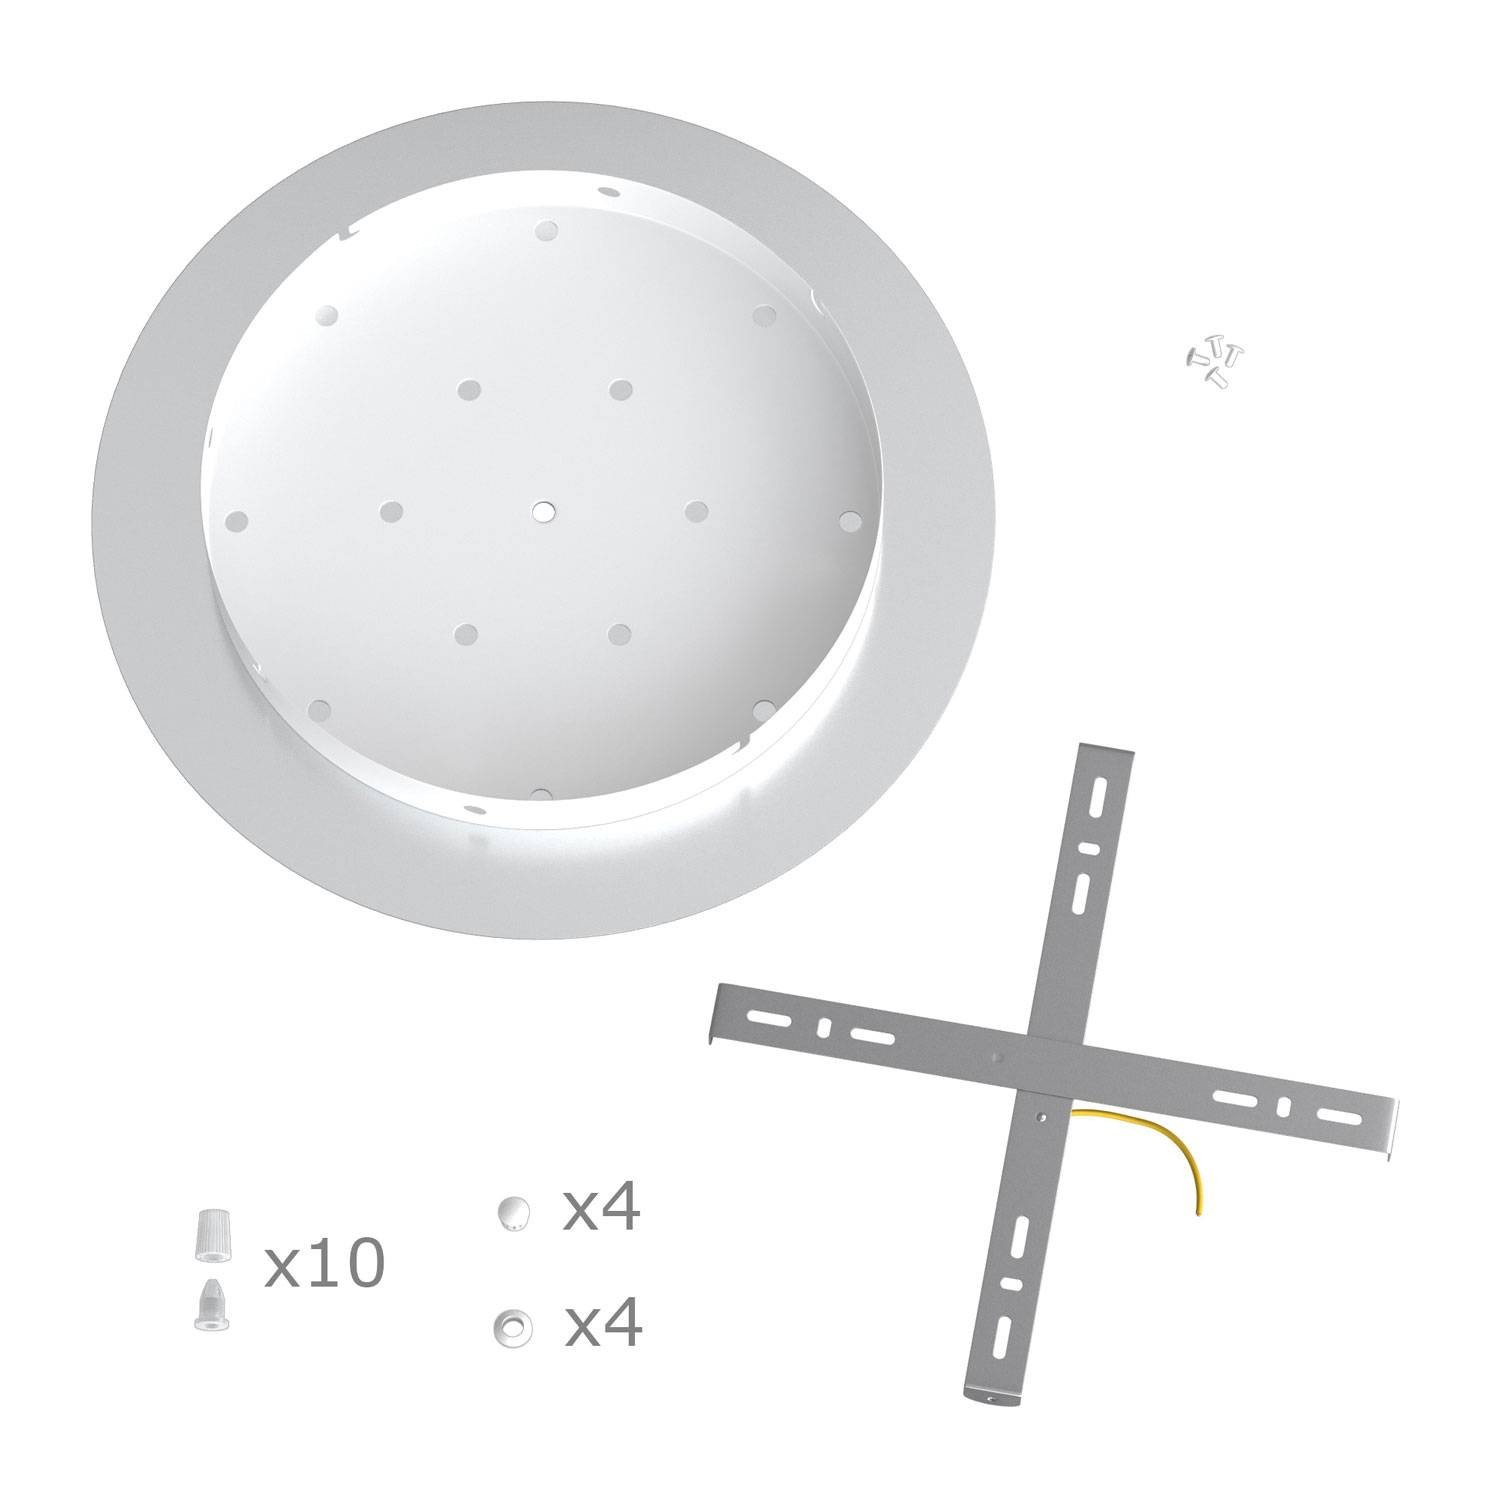 Round XXL Rose-One 10-hole and 4 side holes ceiling rose kit, 400 mm - PROMO